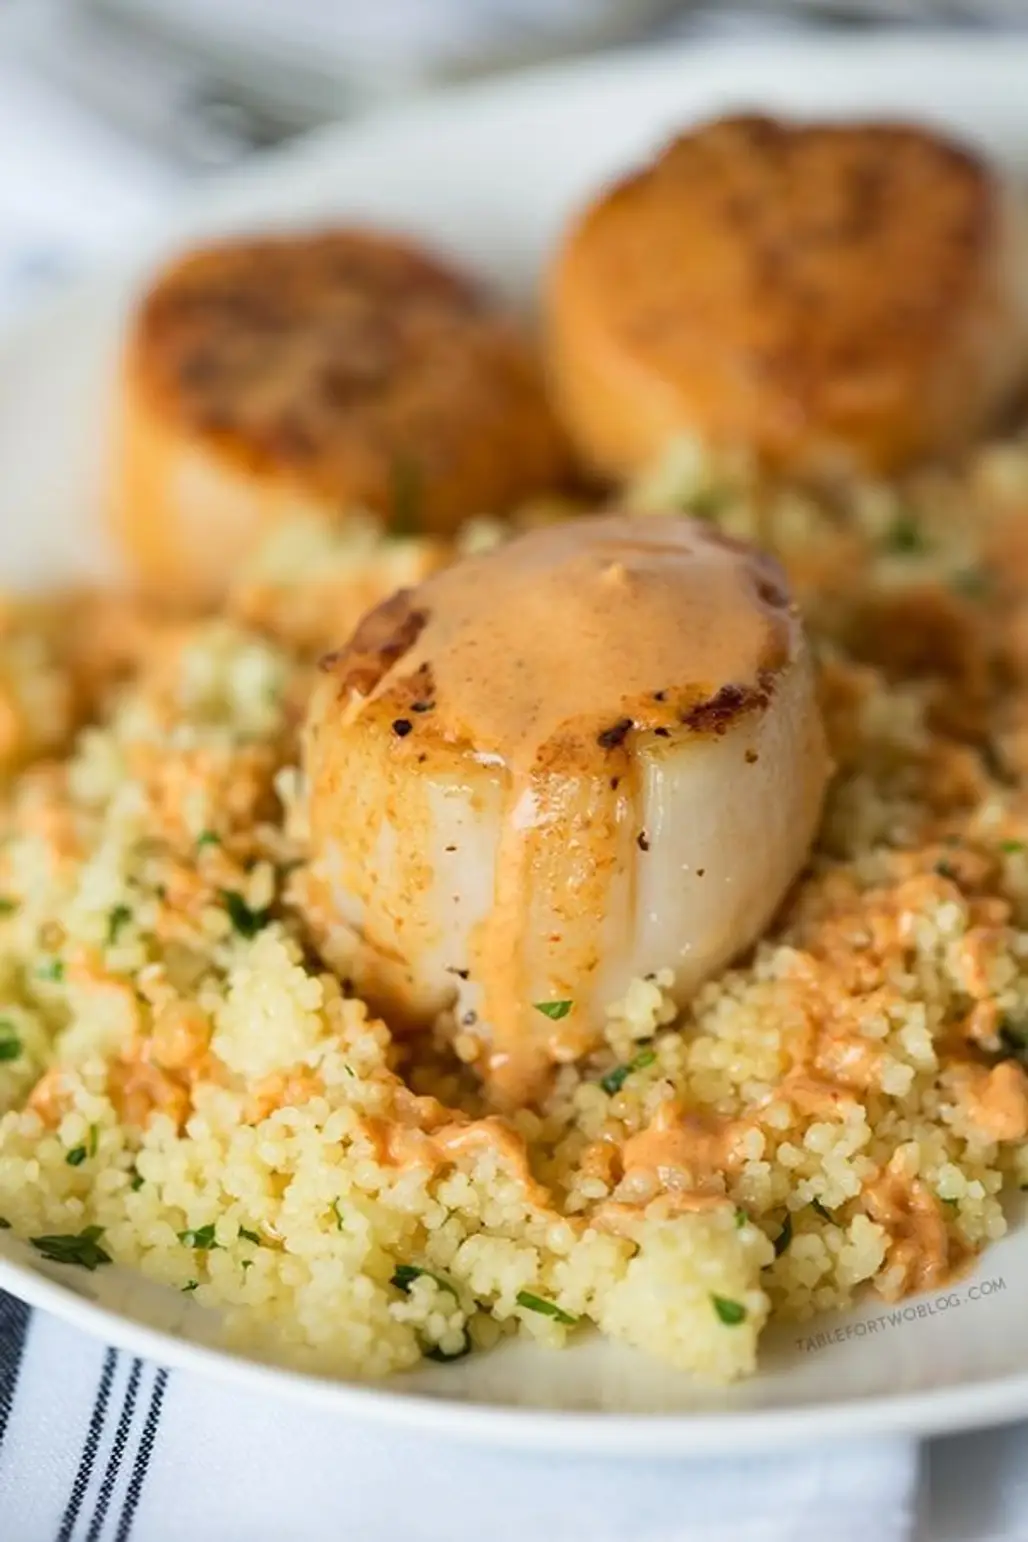 Scallops with Spicy Curry Sauce and Couscous